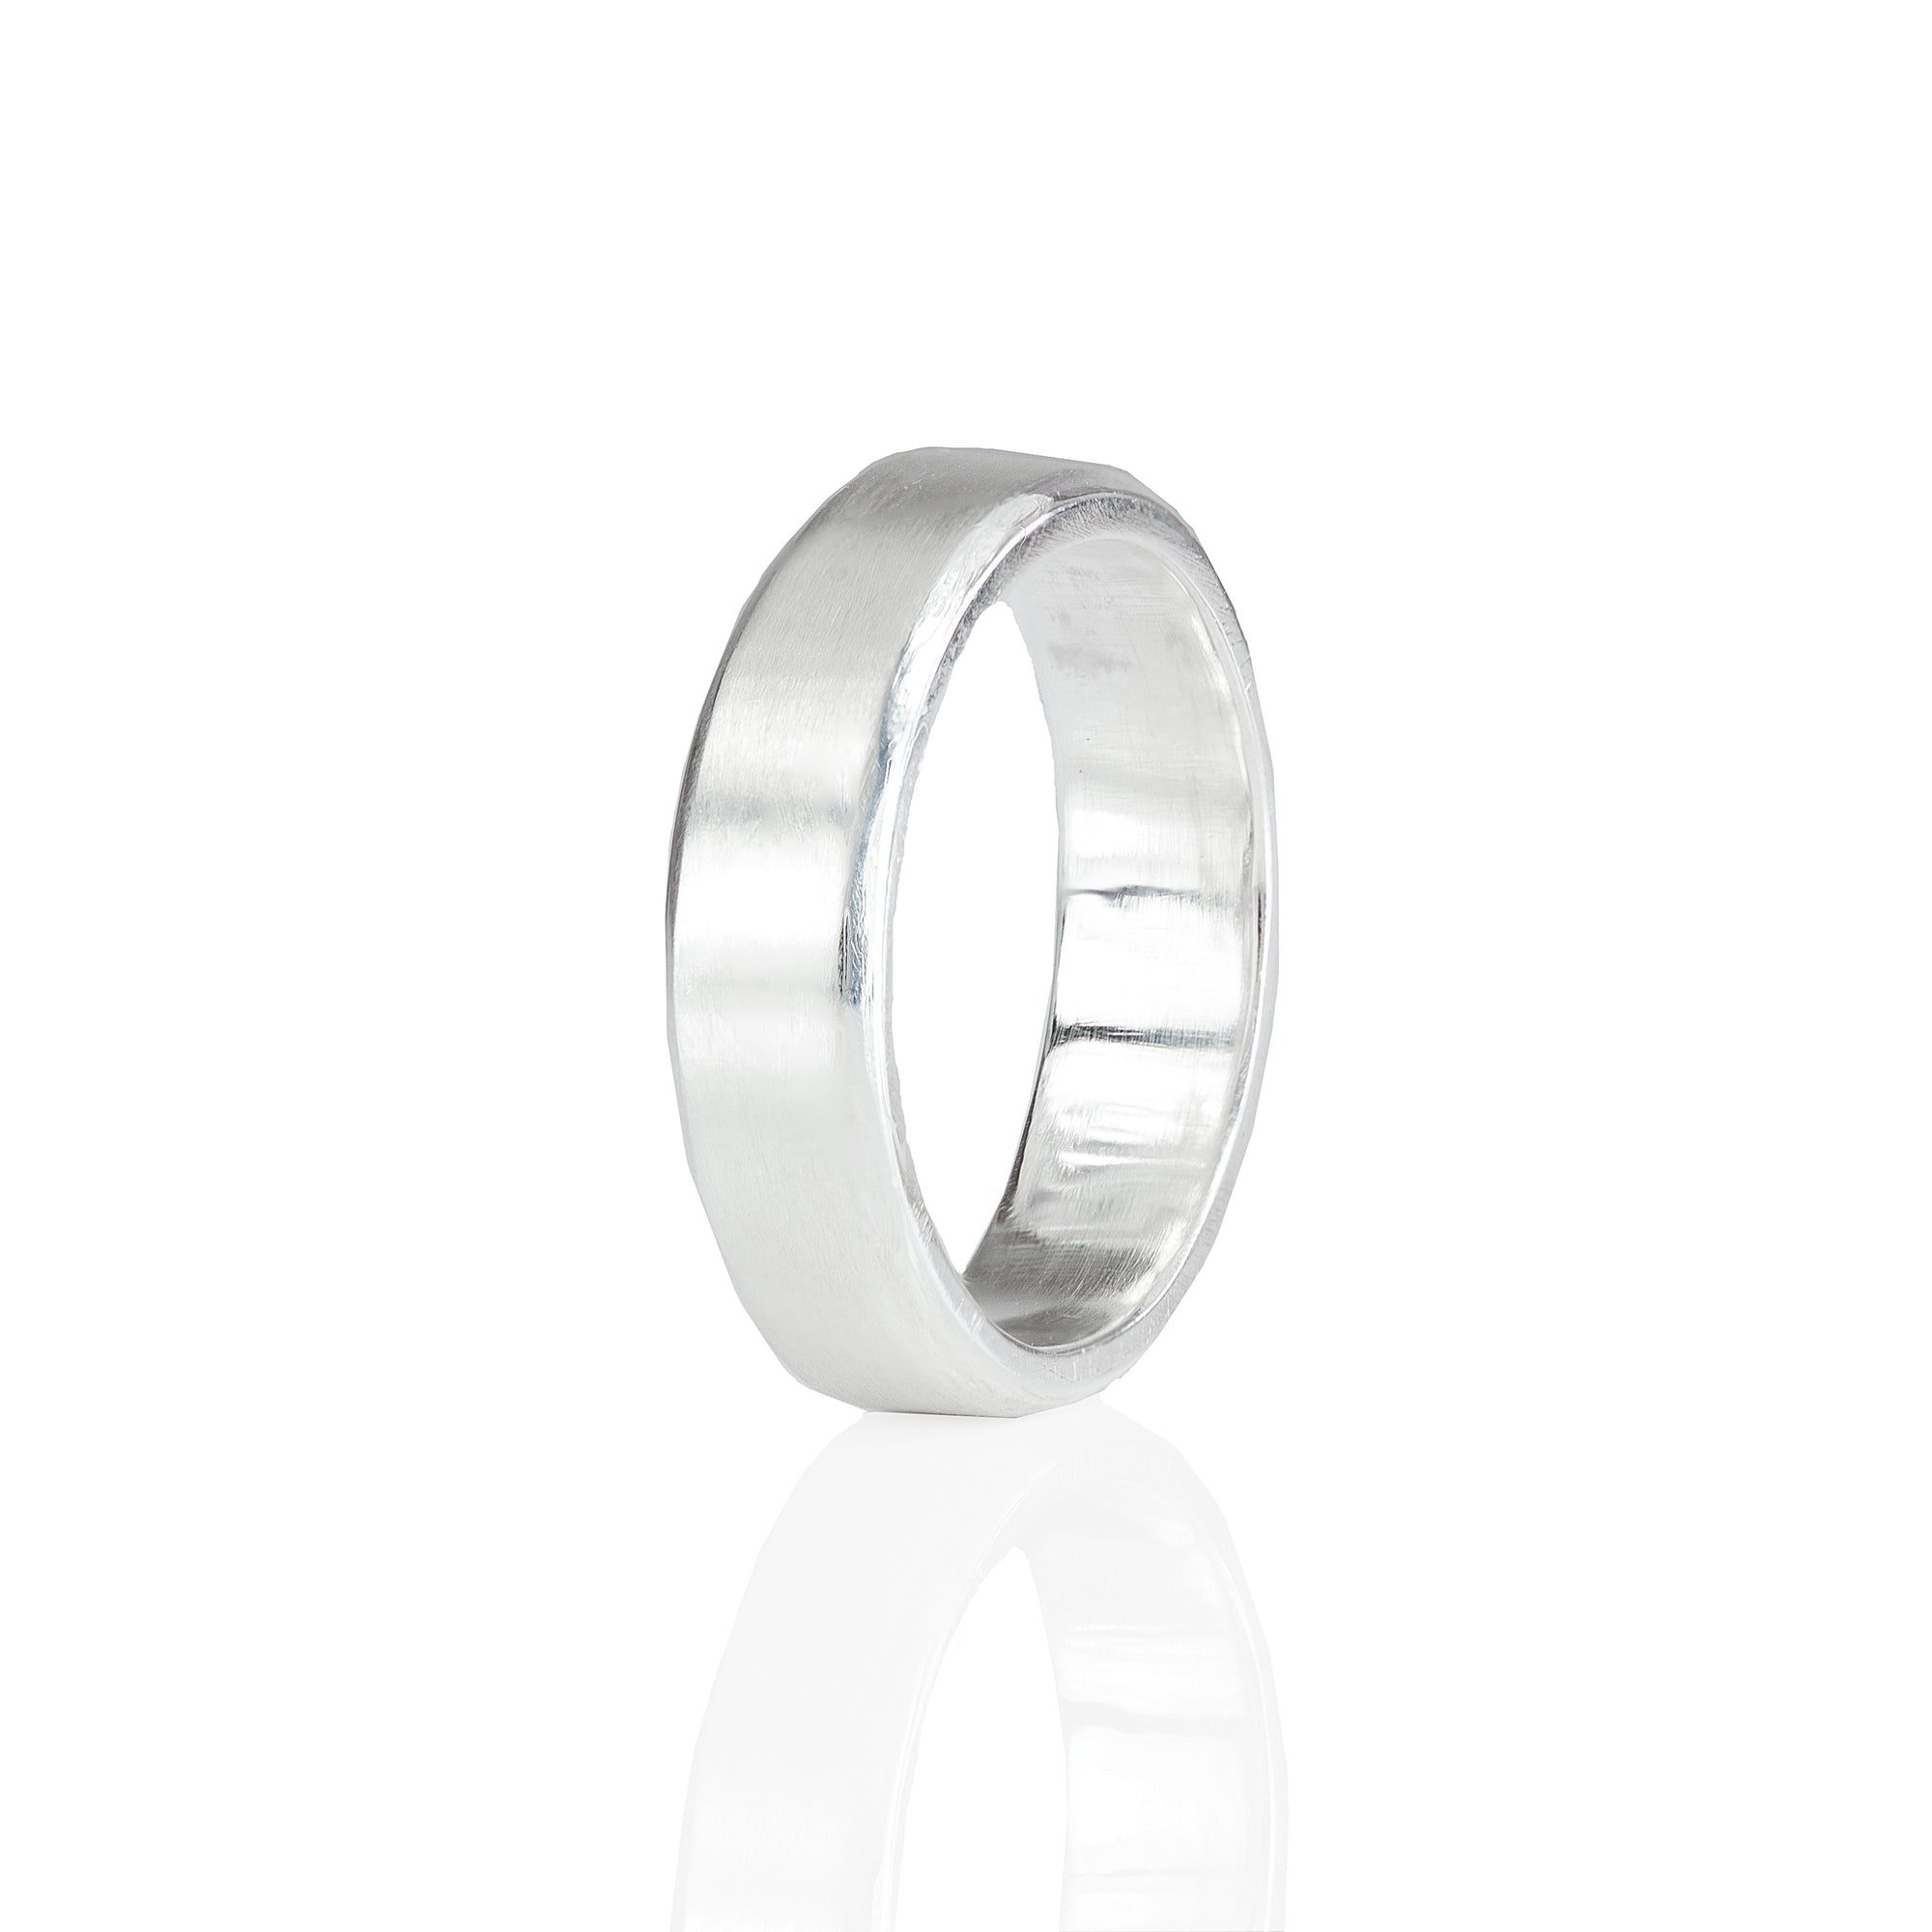 5mm Bevelled Edge Wedding Ring in 18ct Gold